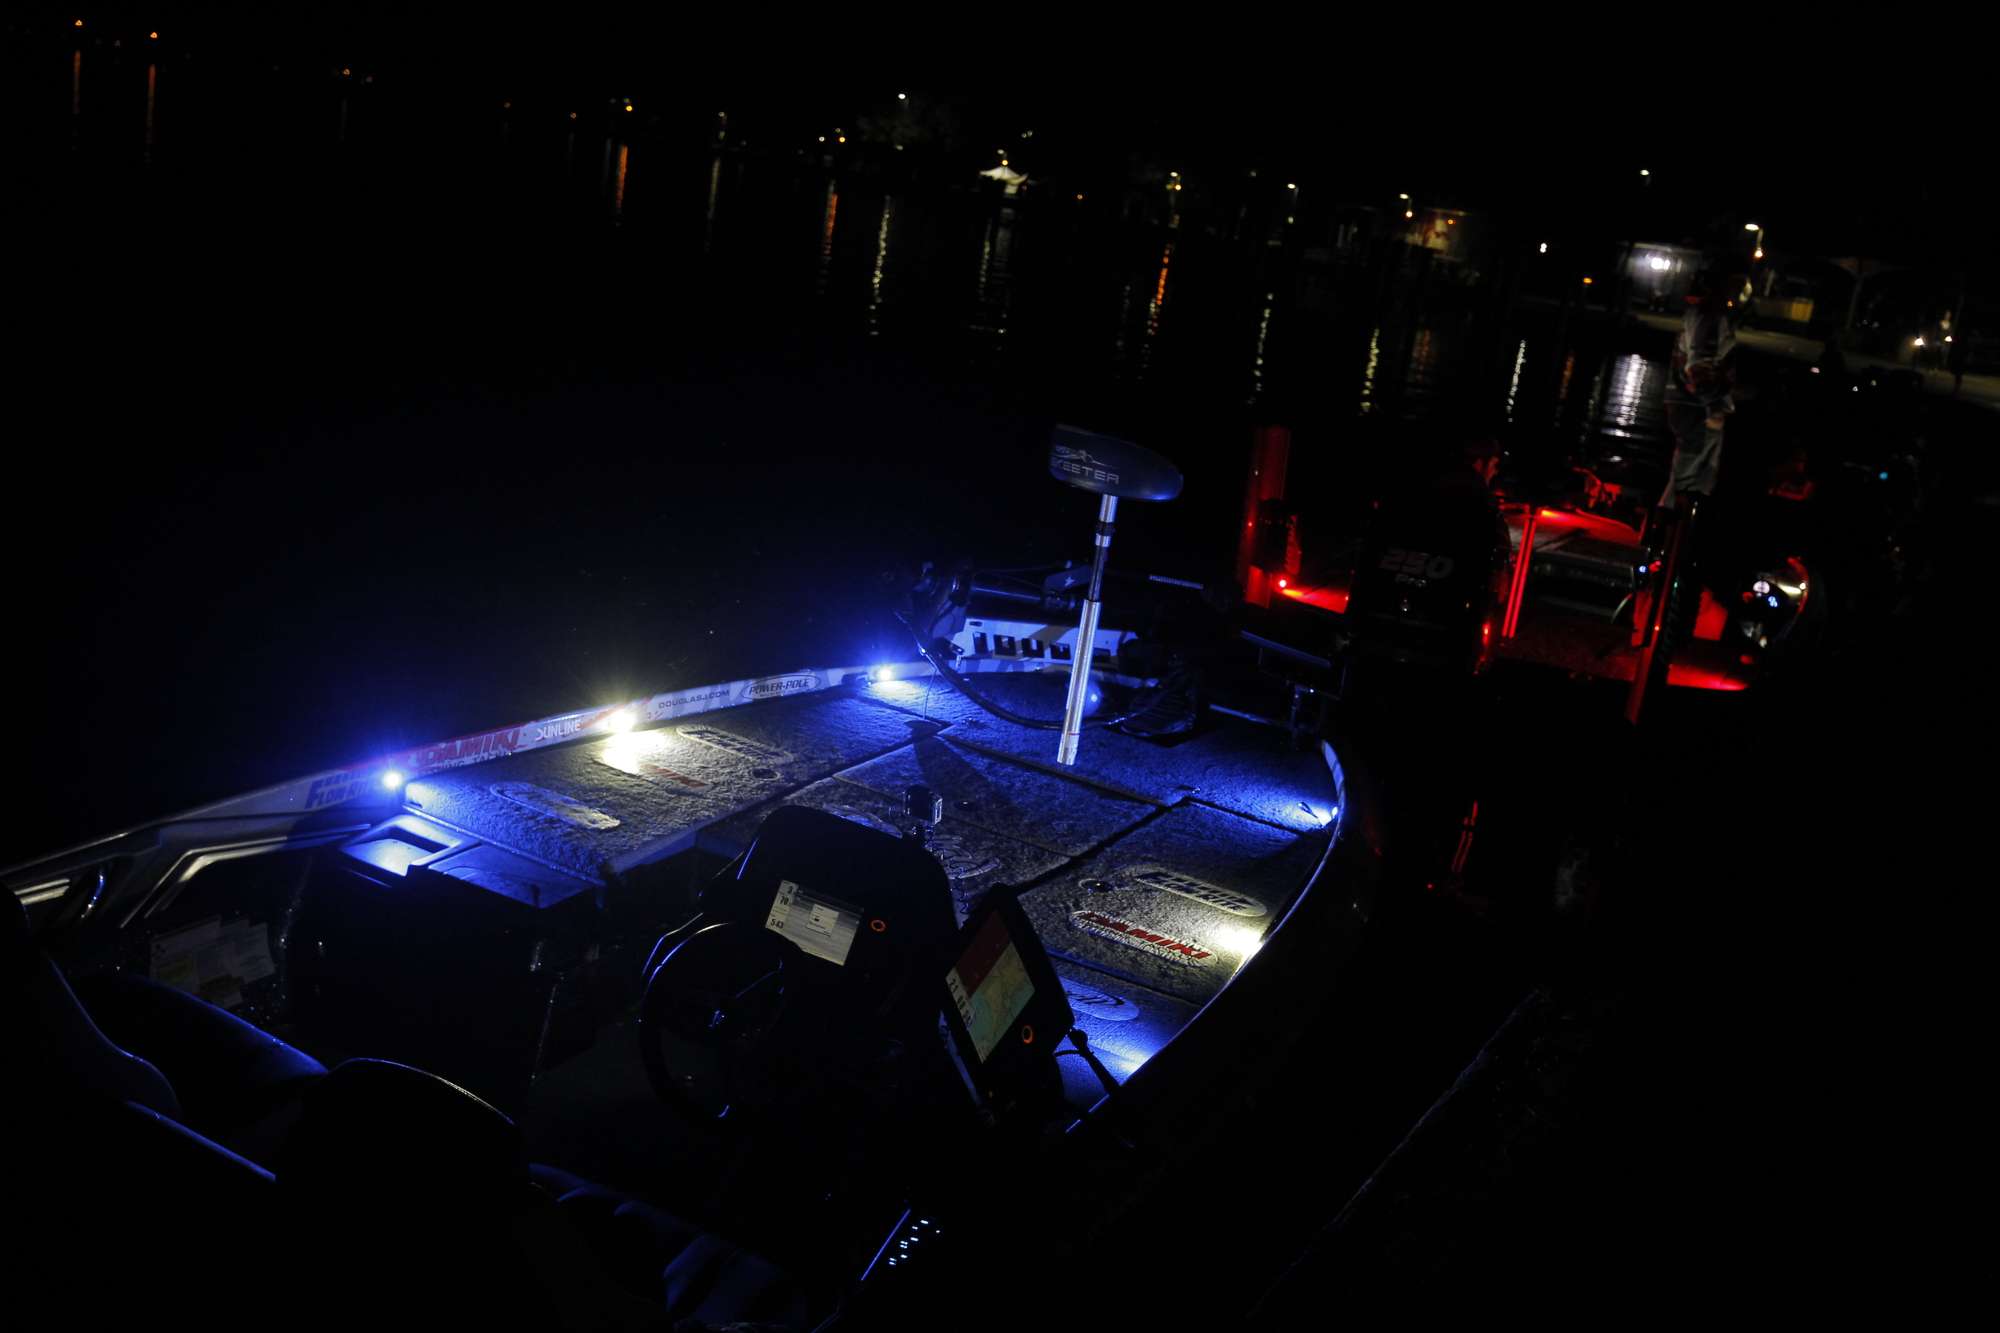 The darkness at the final-day launch at Lake St. Clair Metropark was broken only by the lights on the boats.